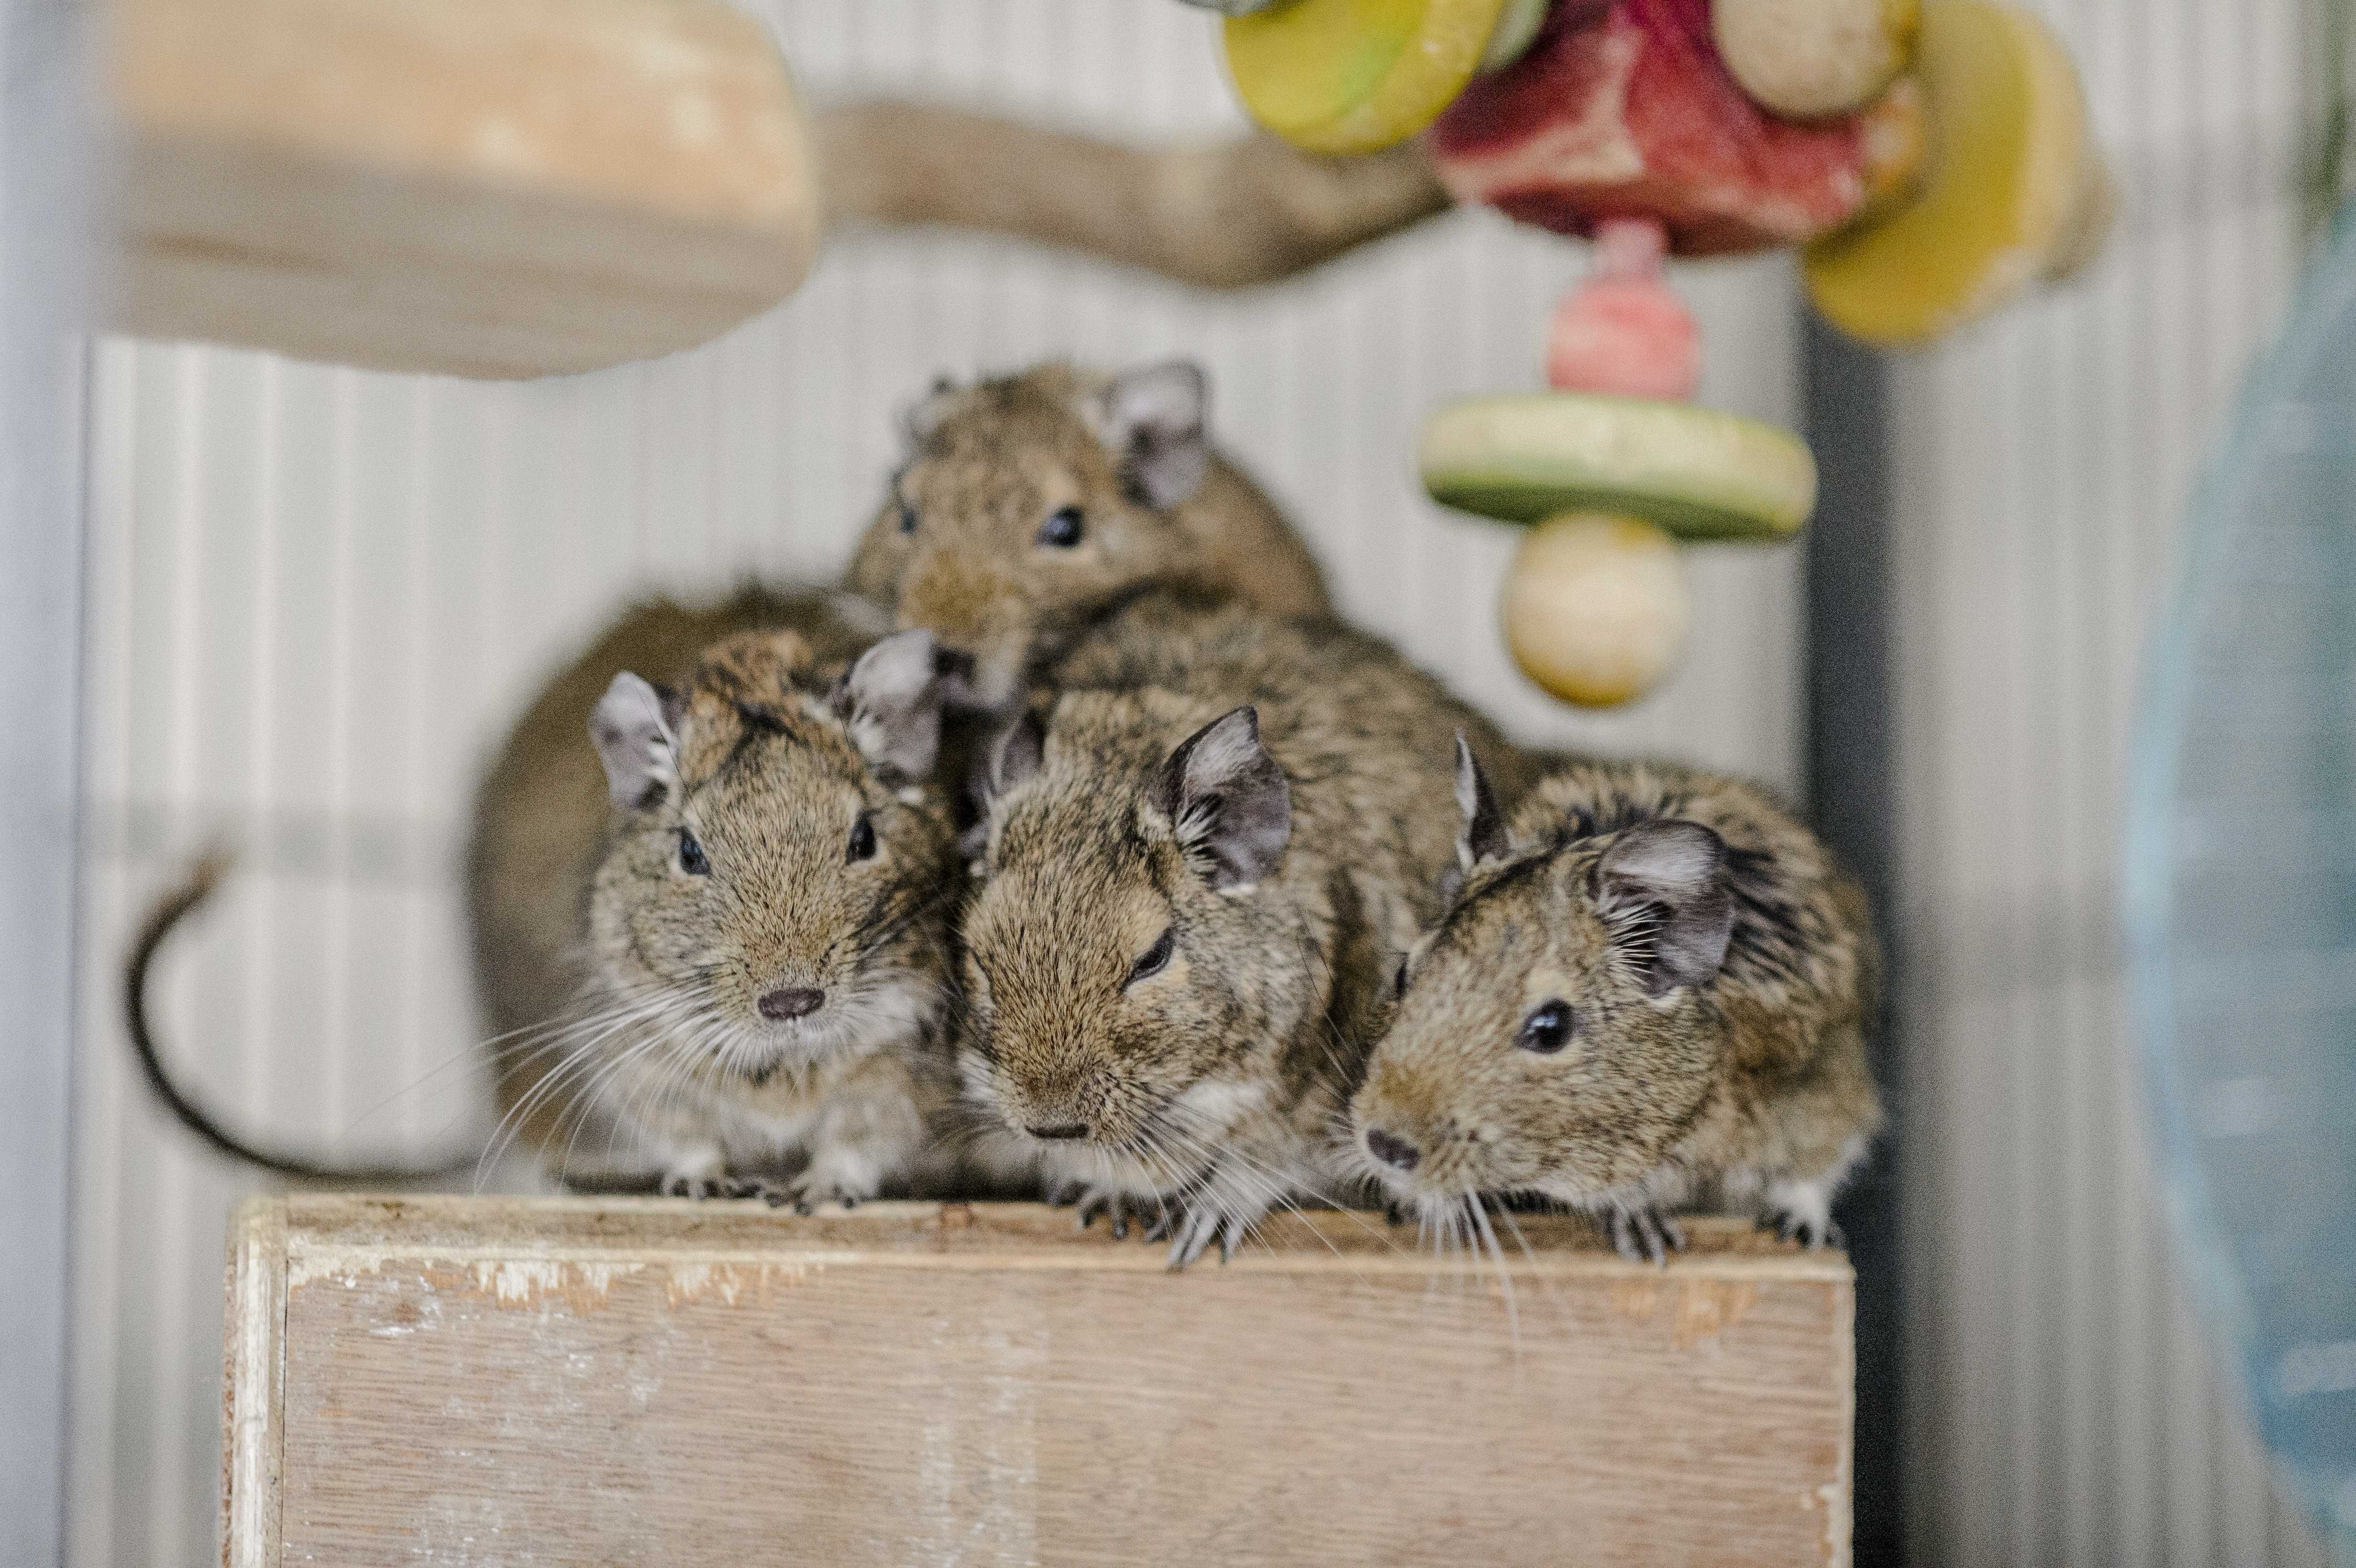 Four degus huddle together on a wooden box in their accommodation.